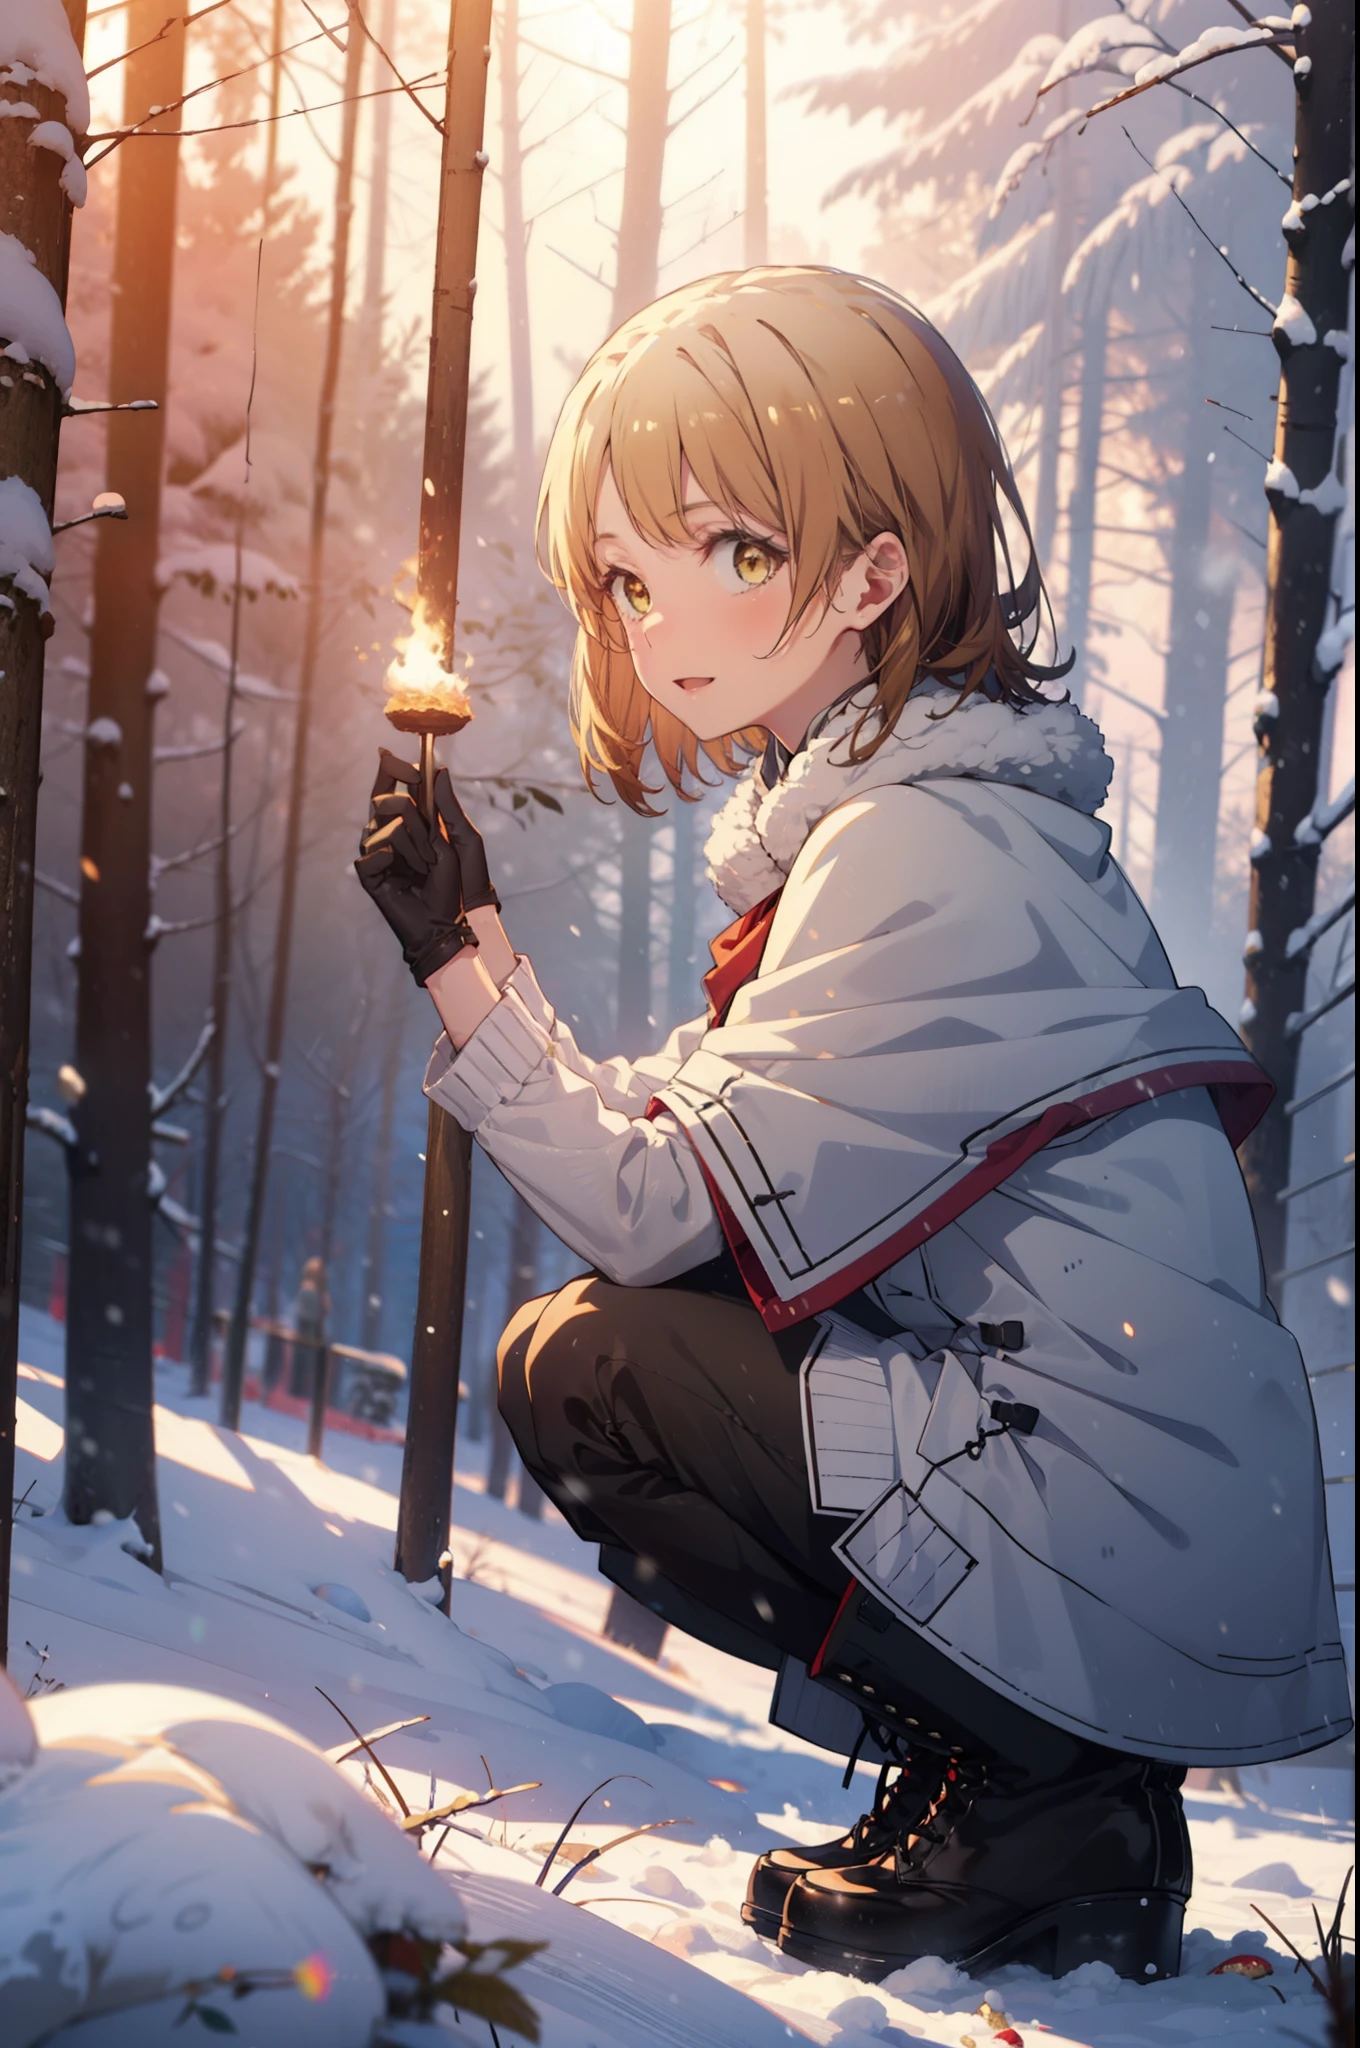 irohaisshiki, iroha isshiki, short hair, brown hair, (Brown eyes:1.5), smile,
Open your mouth,snow, Food, fire, Outdoor, boots, snowing, From the side, wood, suitcase, Cape, Blurred, Food up, forest, gloves, nature, Brown eyes, red gloves, Squat, Mouth closed, Fooded Cape, winter, Written boundary depth, Black shoes, red Cape break looking at viewer, Upper Body, whole body, break Outdoor, forest, nature, break (masterpiece:1.2), highest quality, High resolution, unity 8k wallpaper, (shape:0.8), (Fine and beautiful eyes:1.6), Highly detailed face, Perfect lighting, Highly detailed CG, (Perfect hands, Perfect Anatomy),